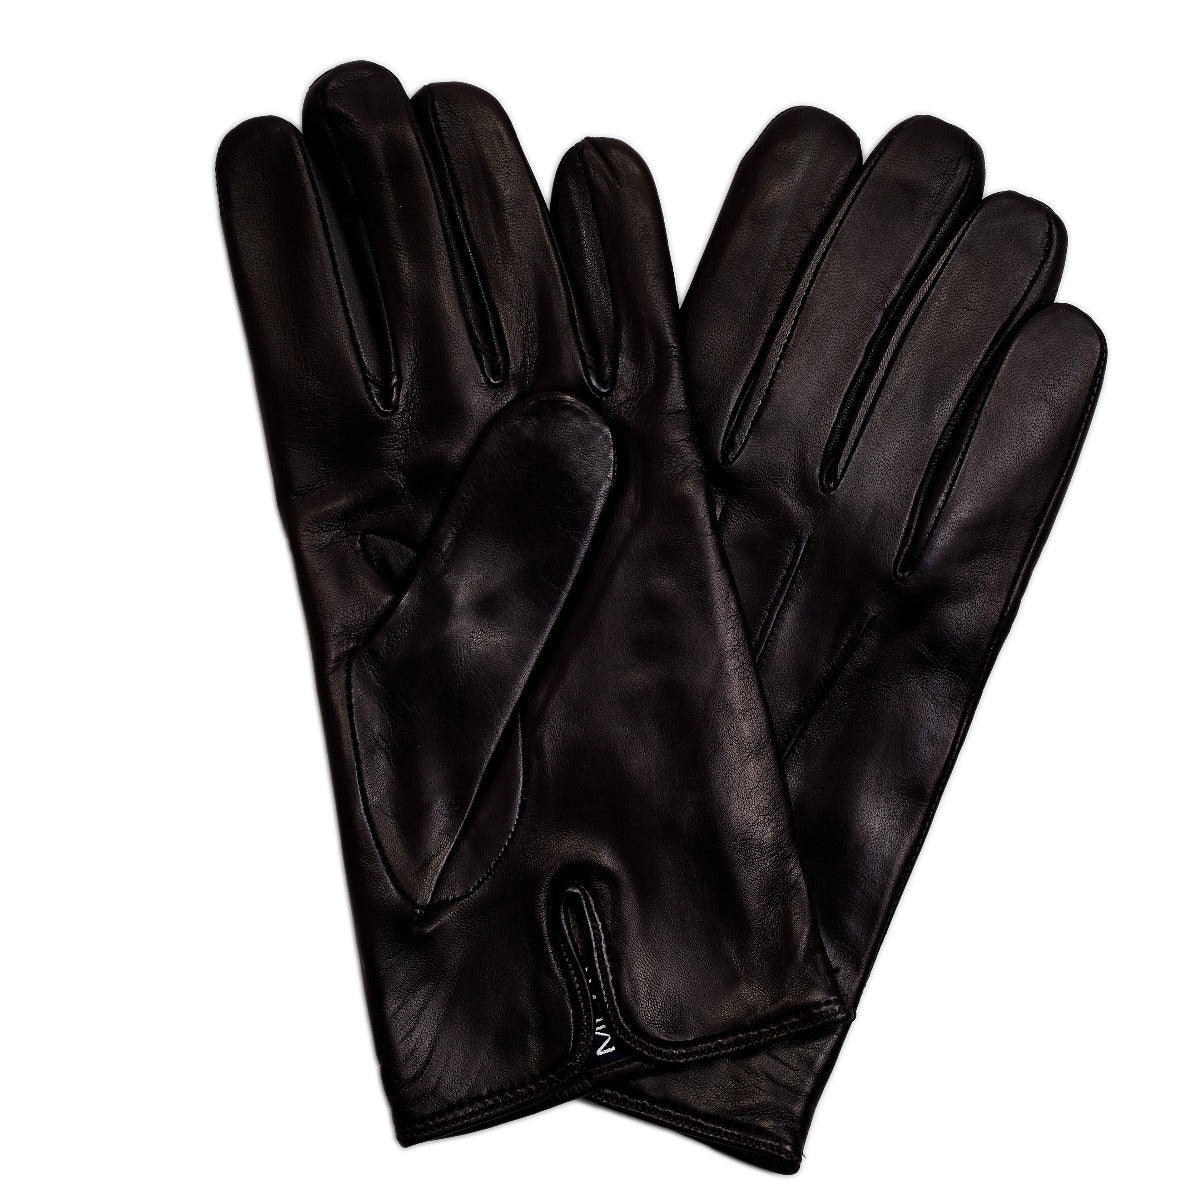 A pair of Sovereign Grade Dark Brown Nappa Leather Gloves, Cashmere Lined from KirbyAllison.com.